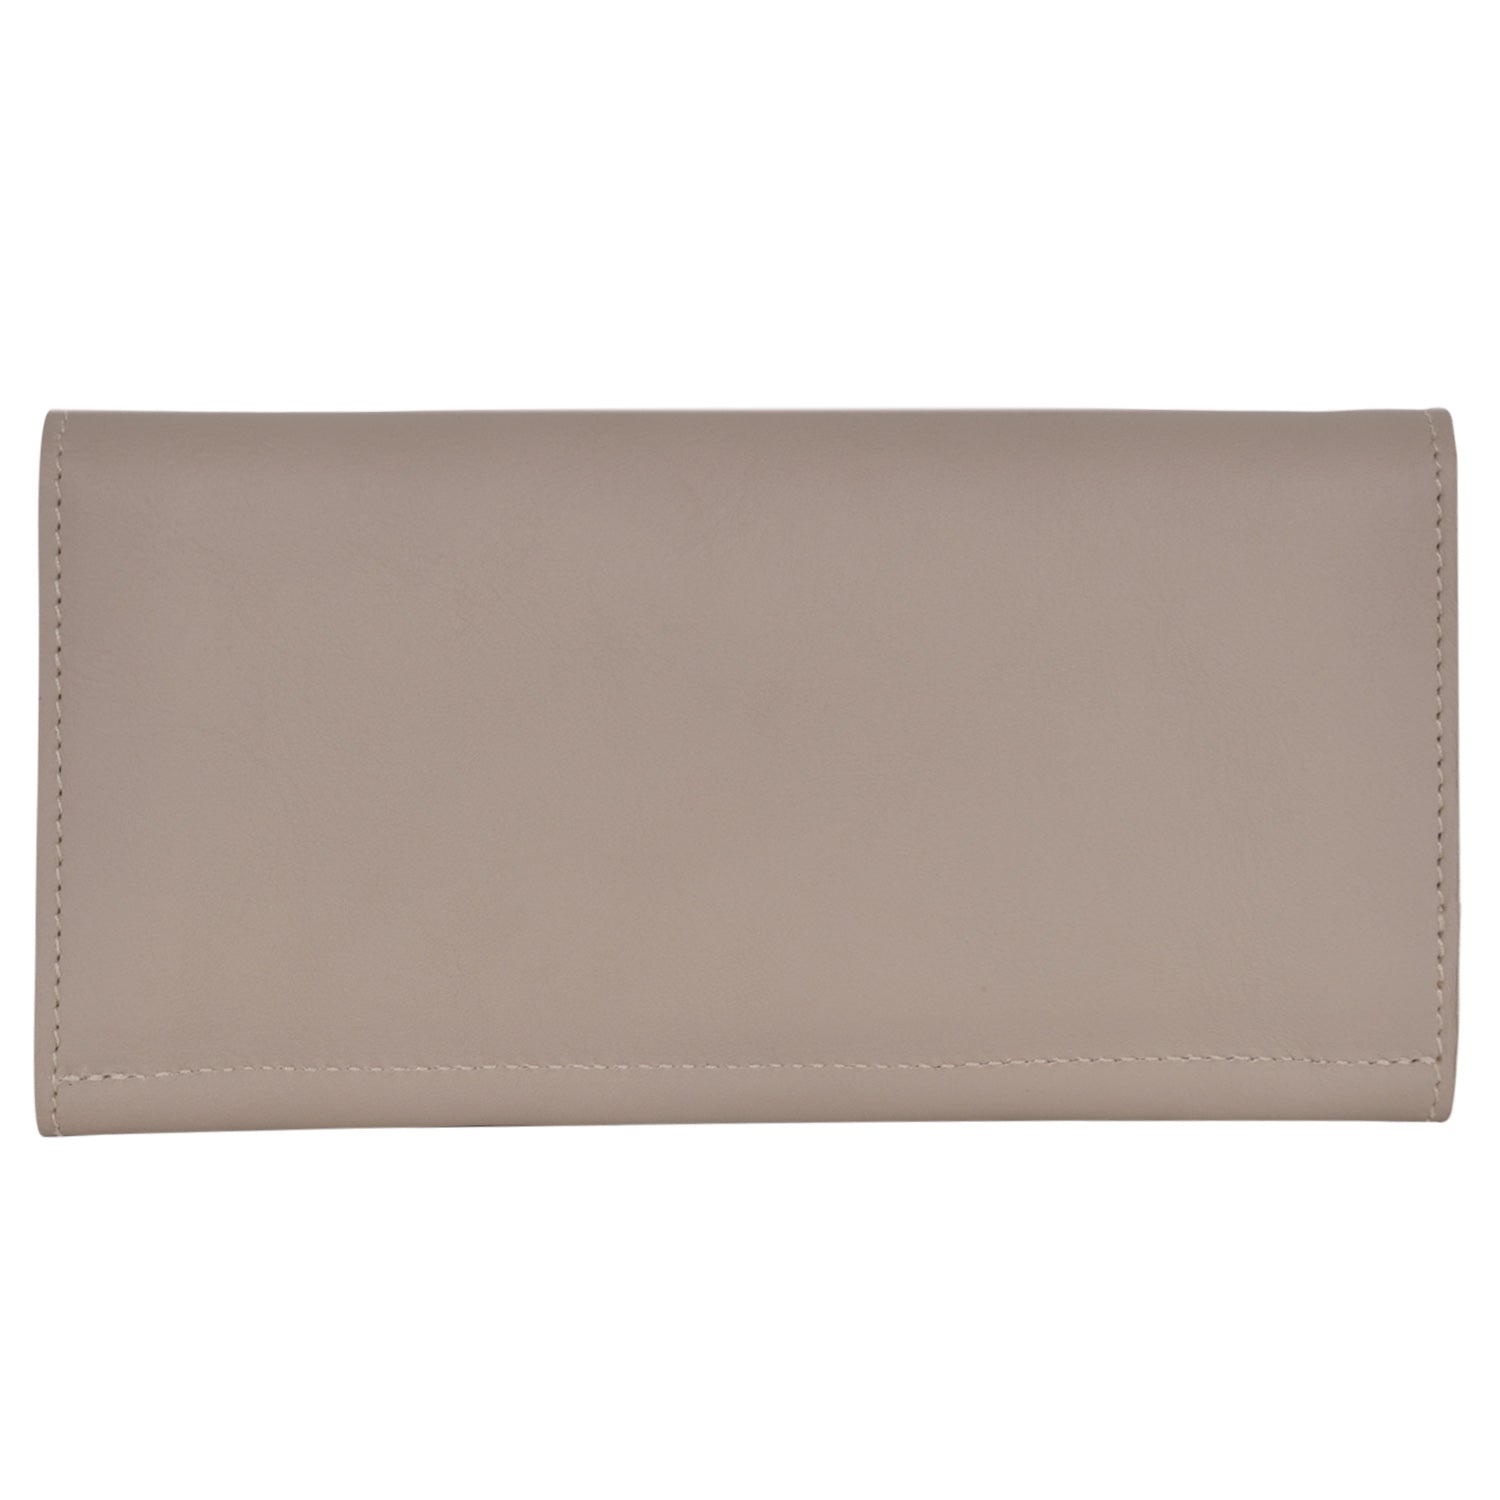 IL BISONTE WOMEN'S TRI-FOLD WALLET IN NATURAL  COWHIDE LEATHER